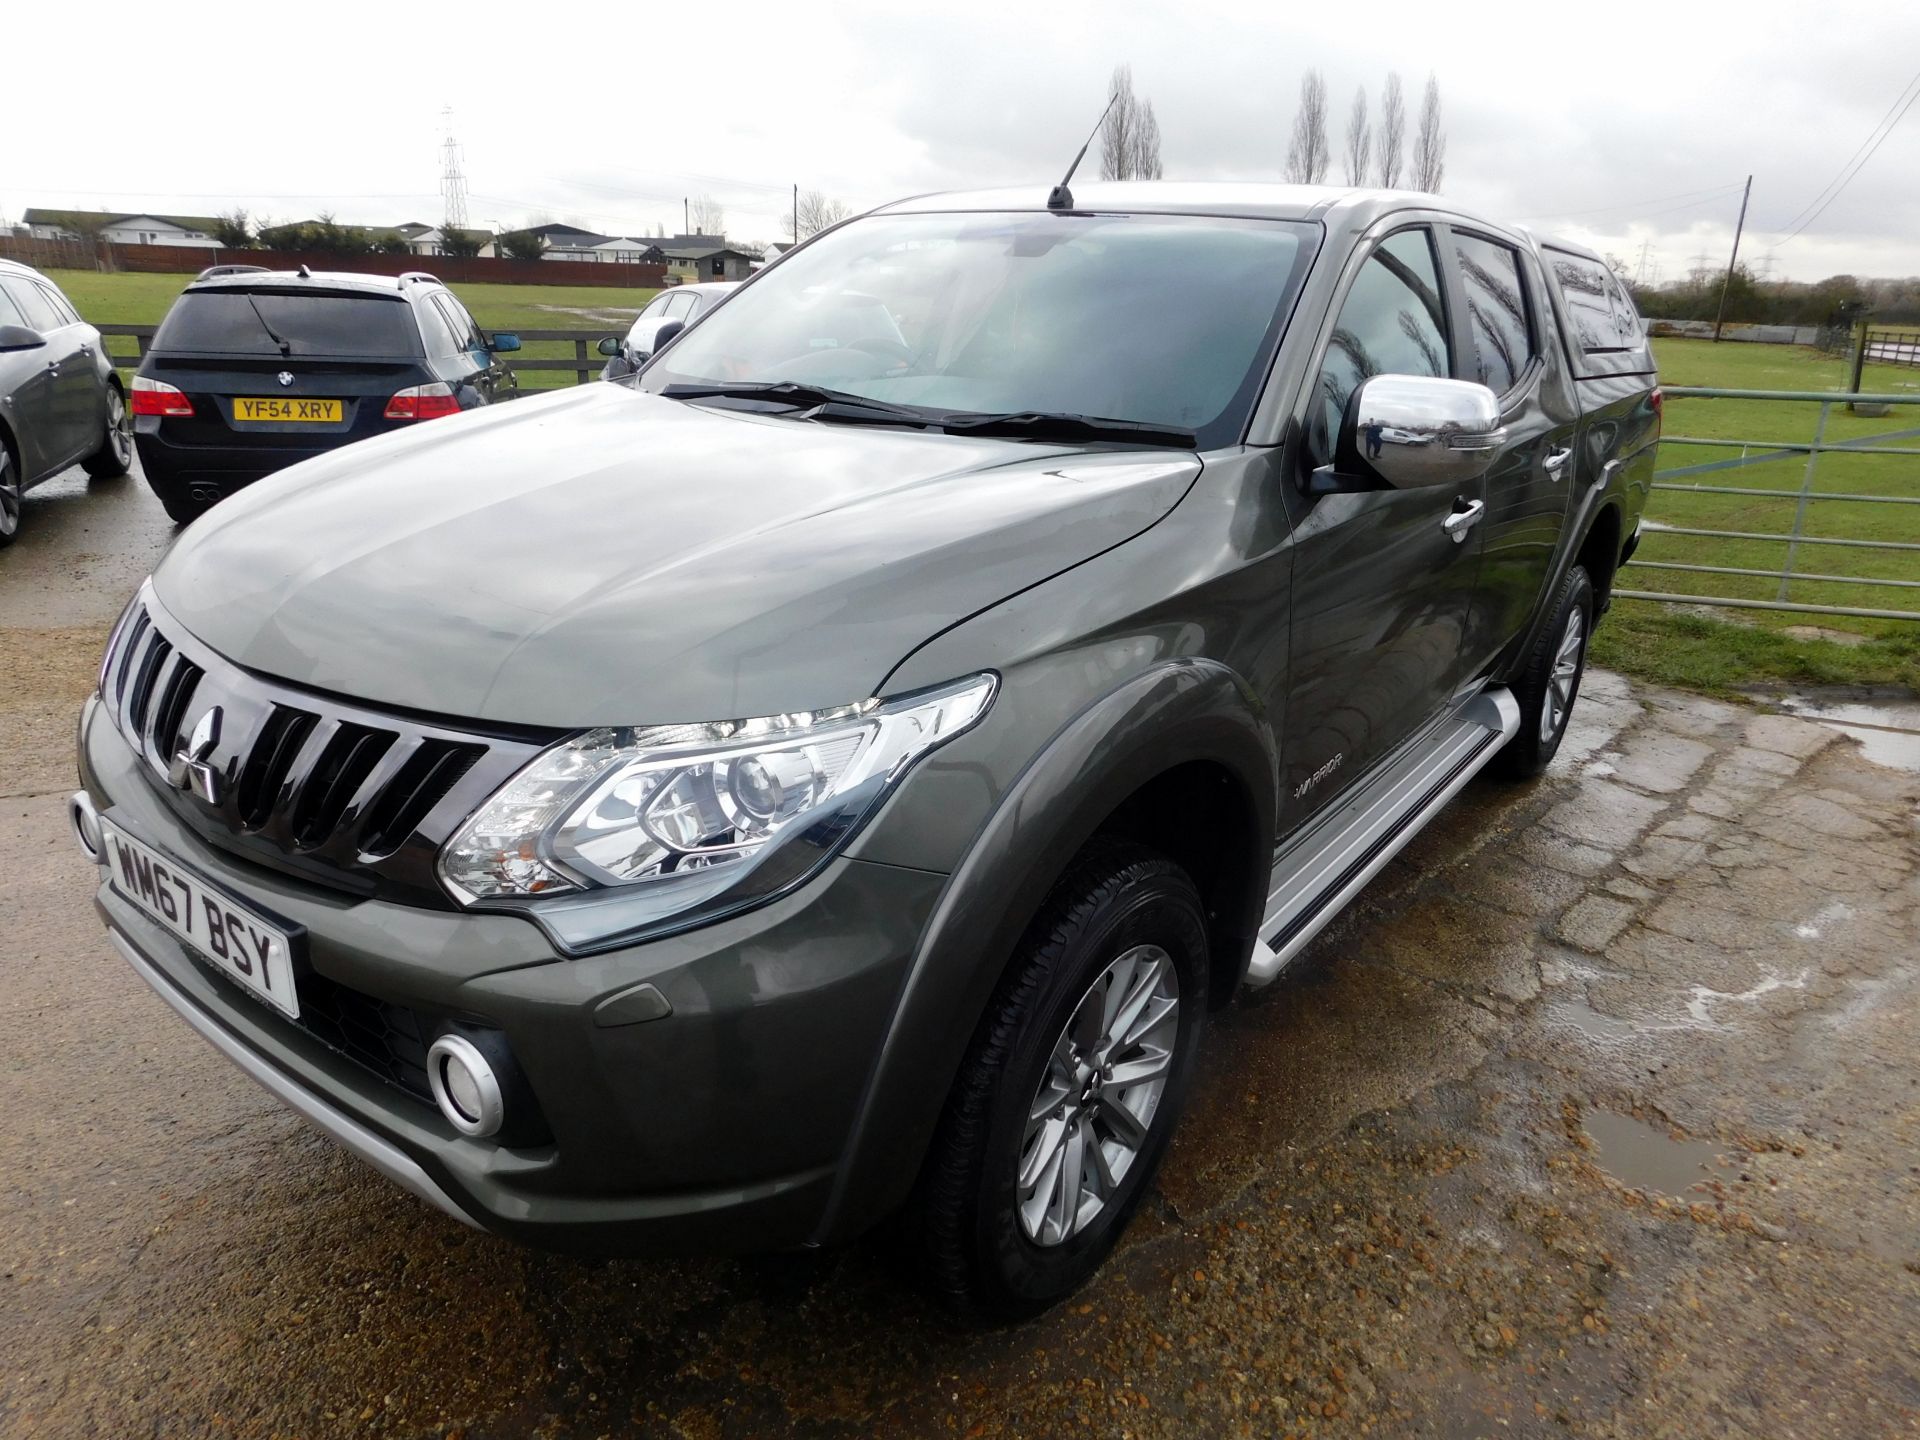 Mitsubishi L200 Warrior DI-D Auto Pick-up, Registration Number: WM67 BSY, First Registered: 18th - Image 2 of 8